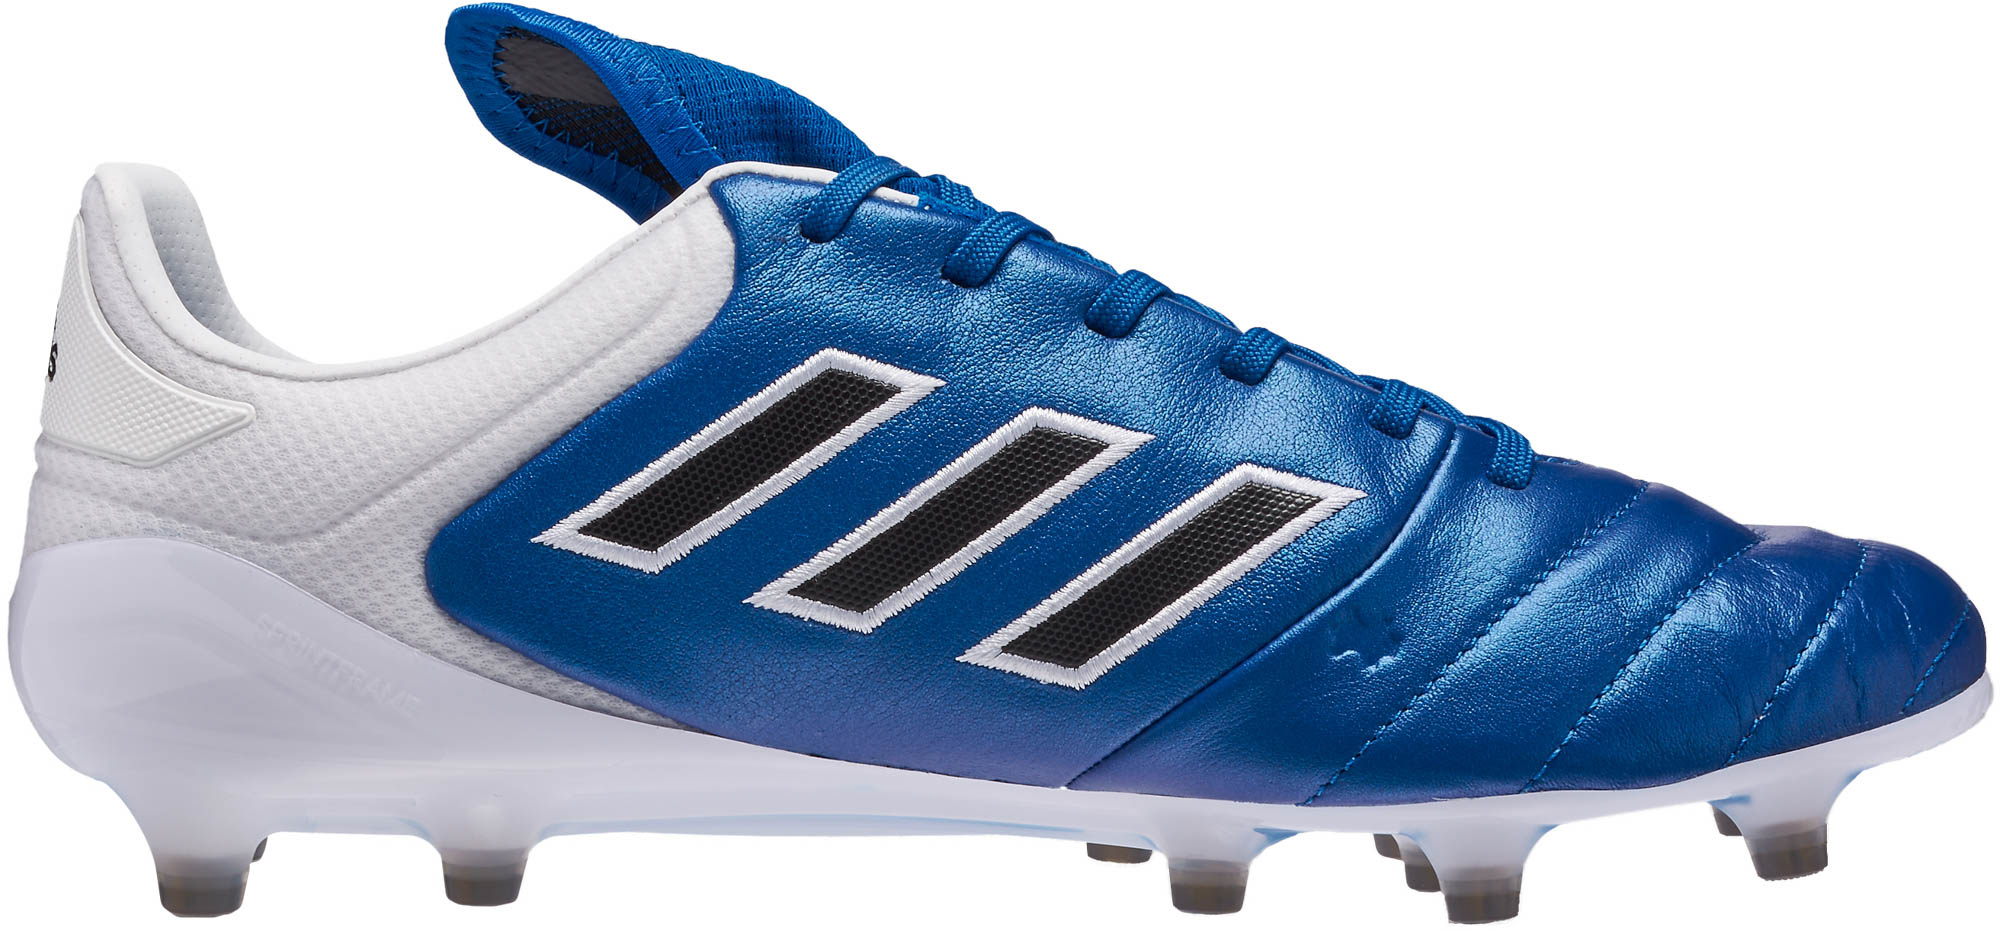 adidas Copa FG Soccer Cleats - Blue & White - Master